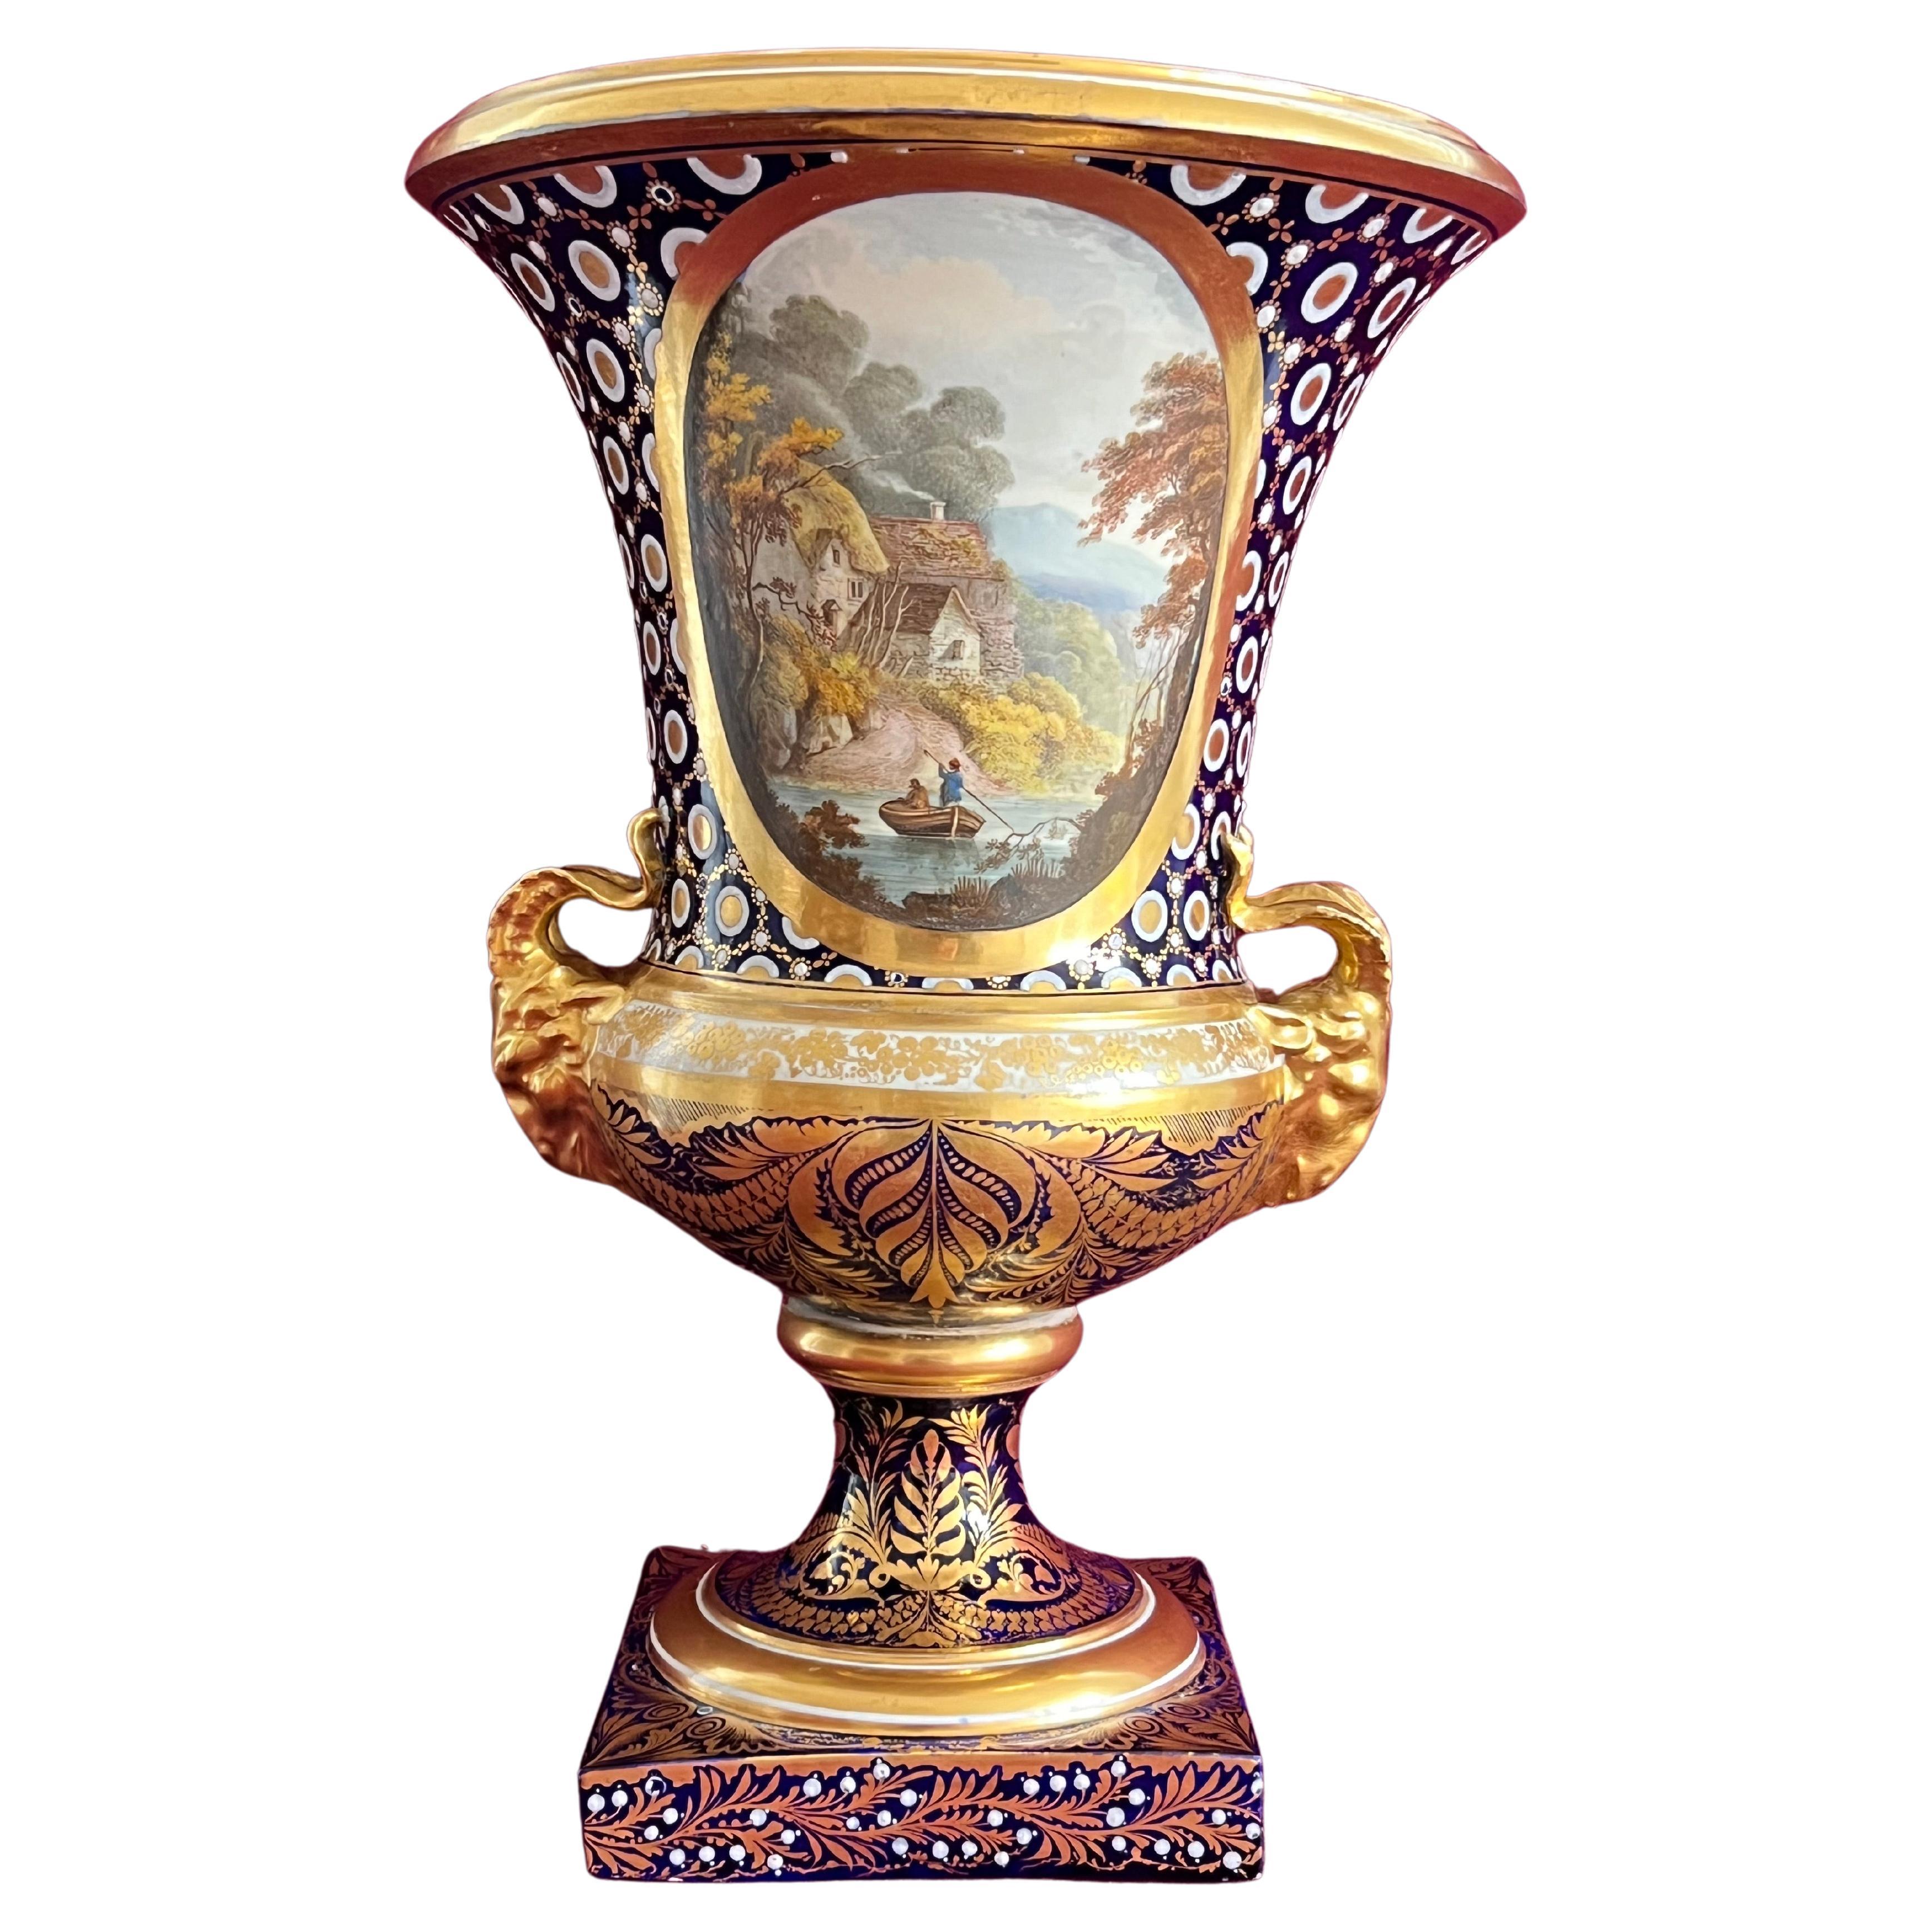 A Derby Porcelain Campana Vase decorated by John Brewer c.1810